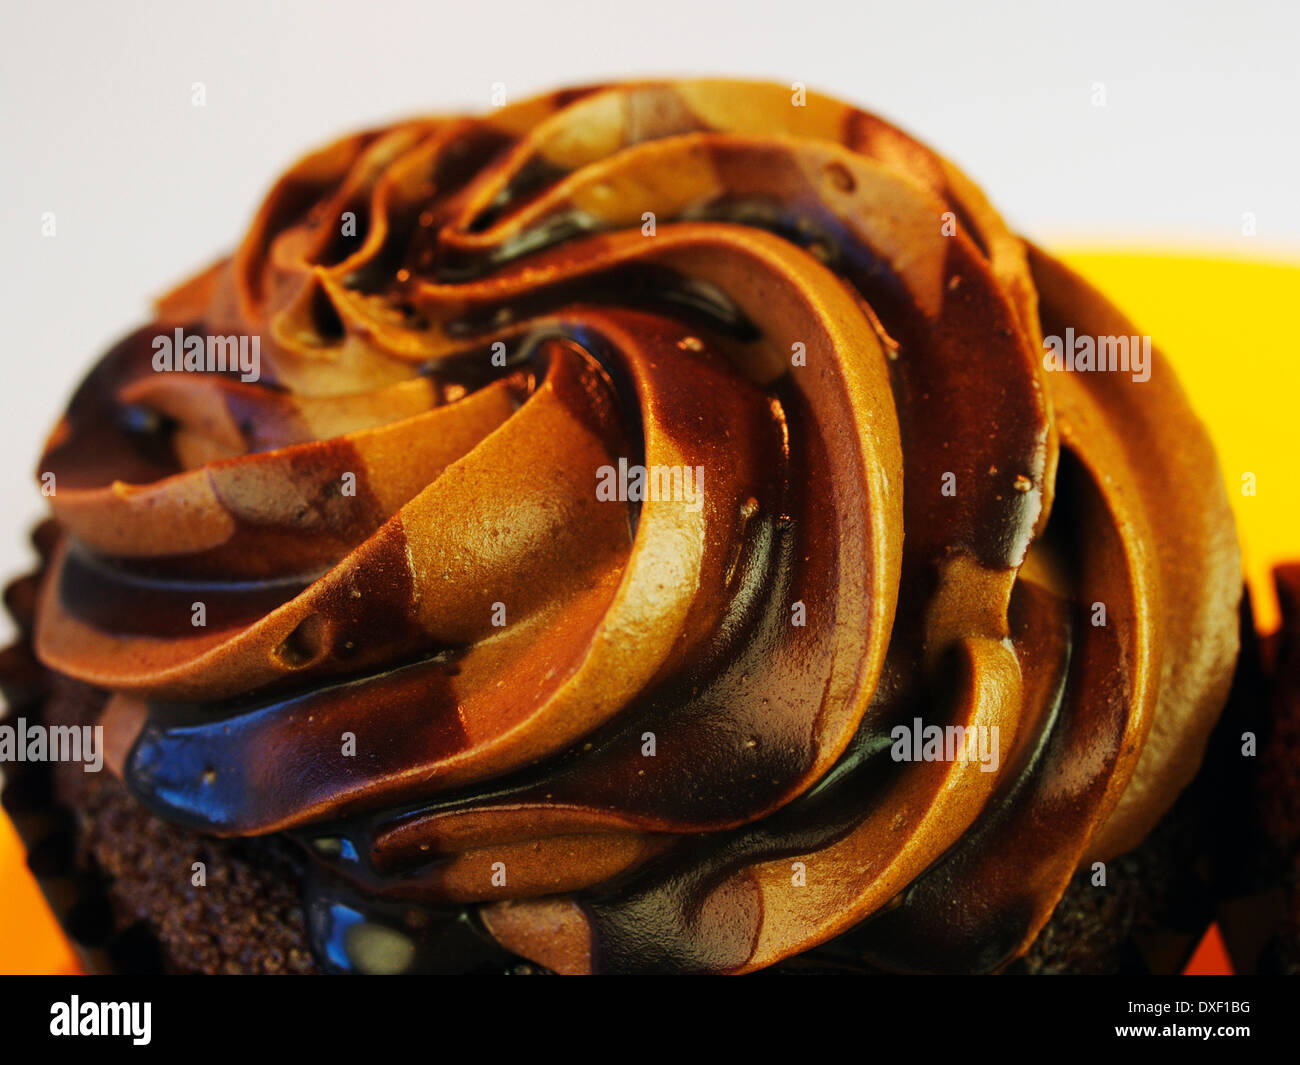 Close Up Of Single Chocolate Cupcake With Icing Stock Photo